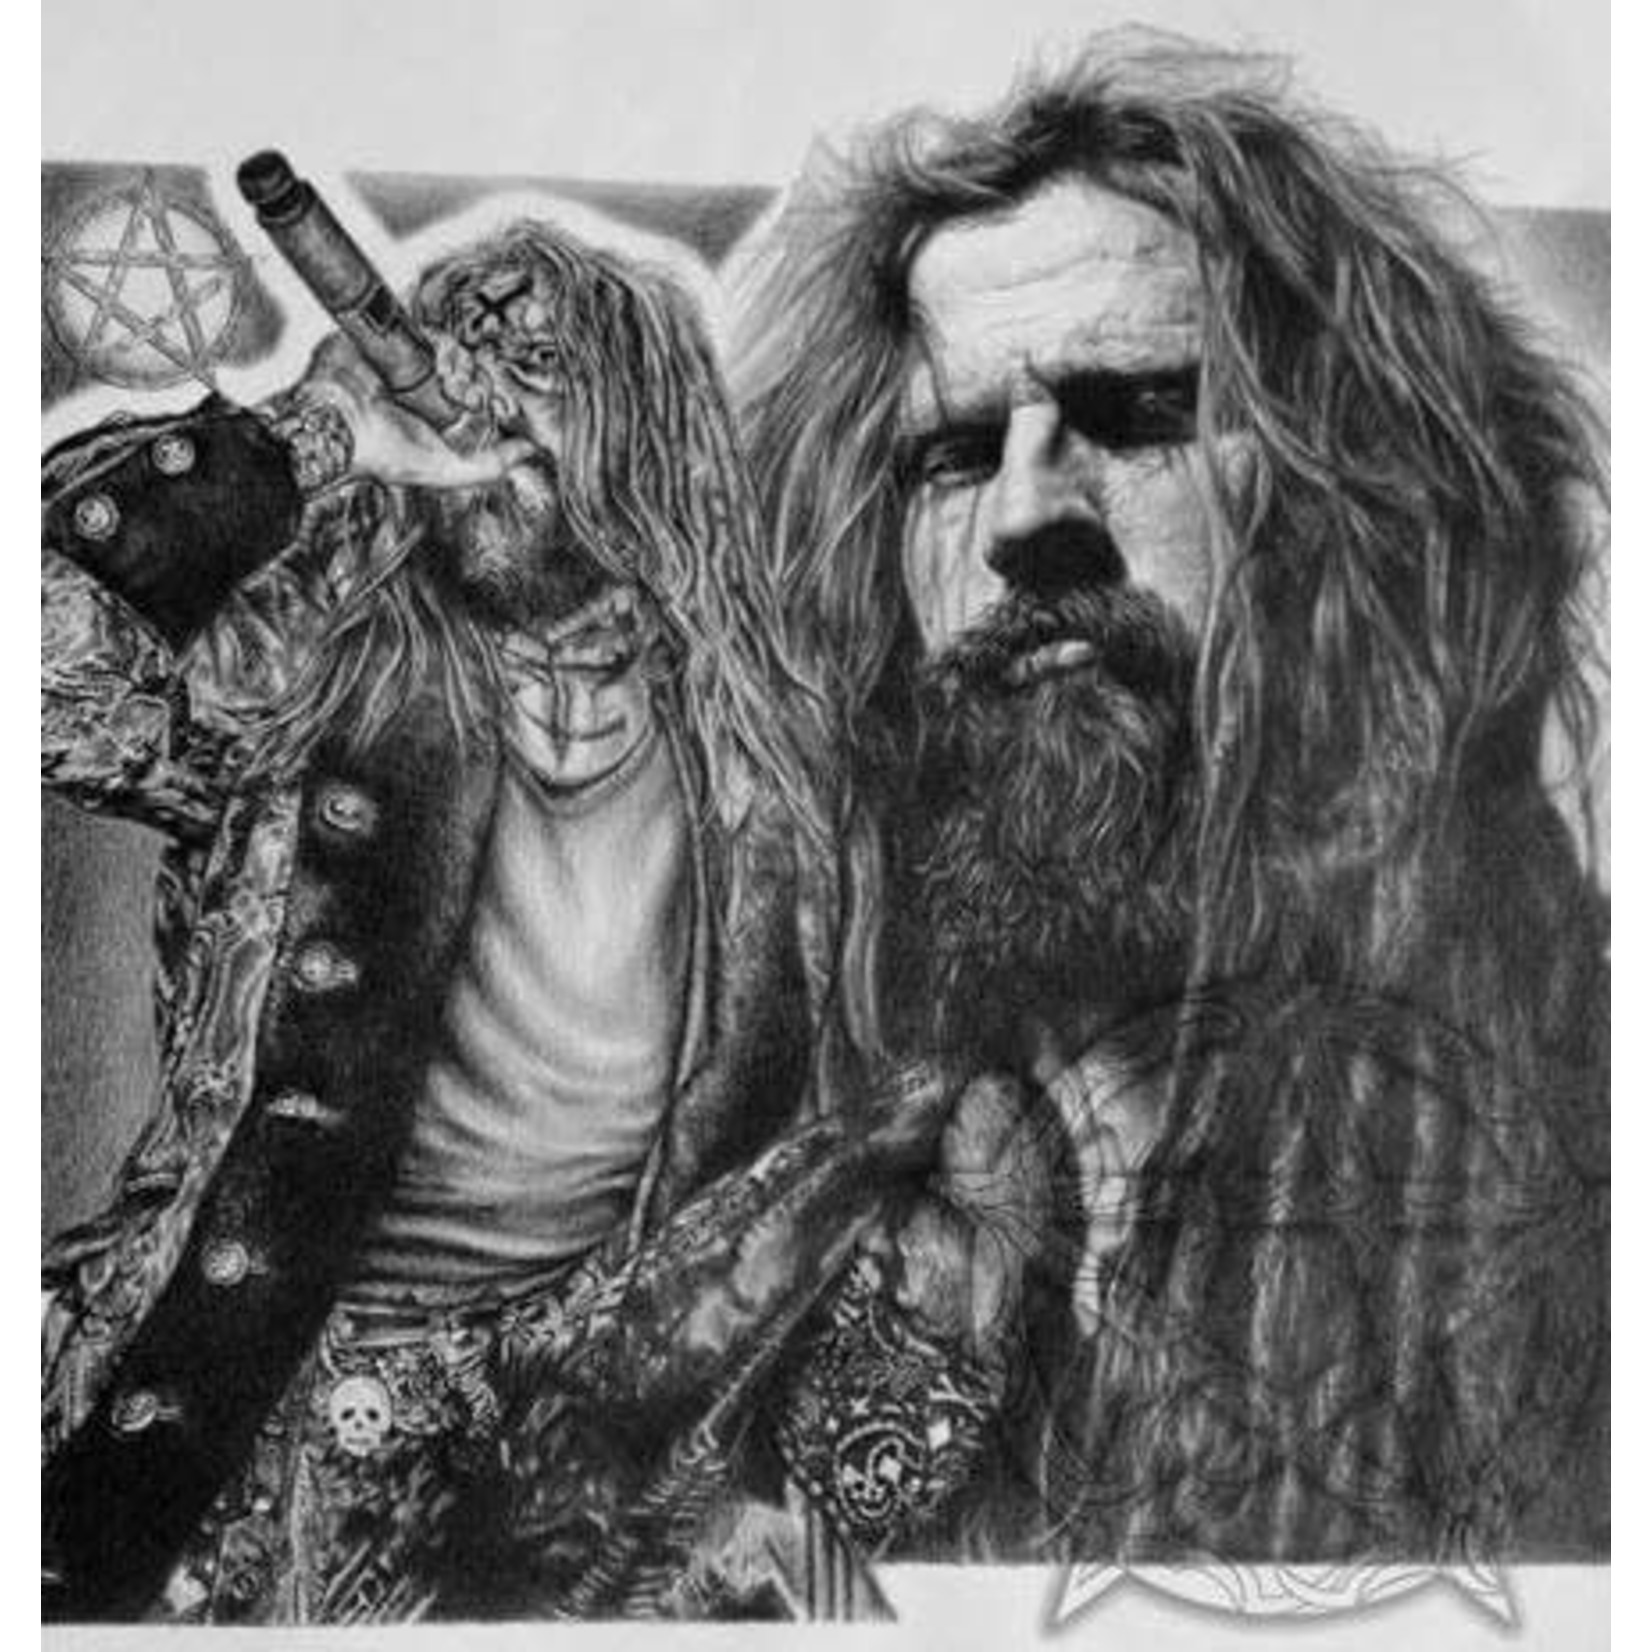 Rock Your Walls Off Rob Zombie (Poster) [18"x24"]